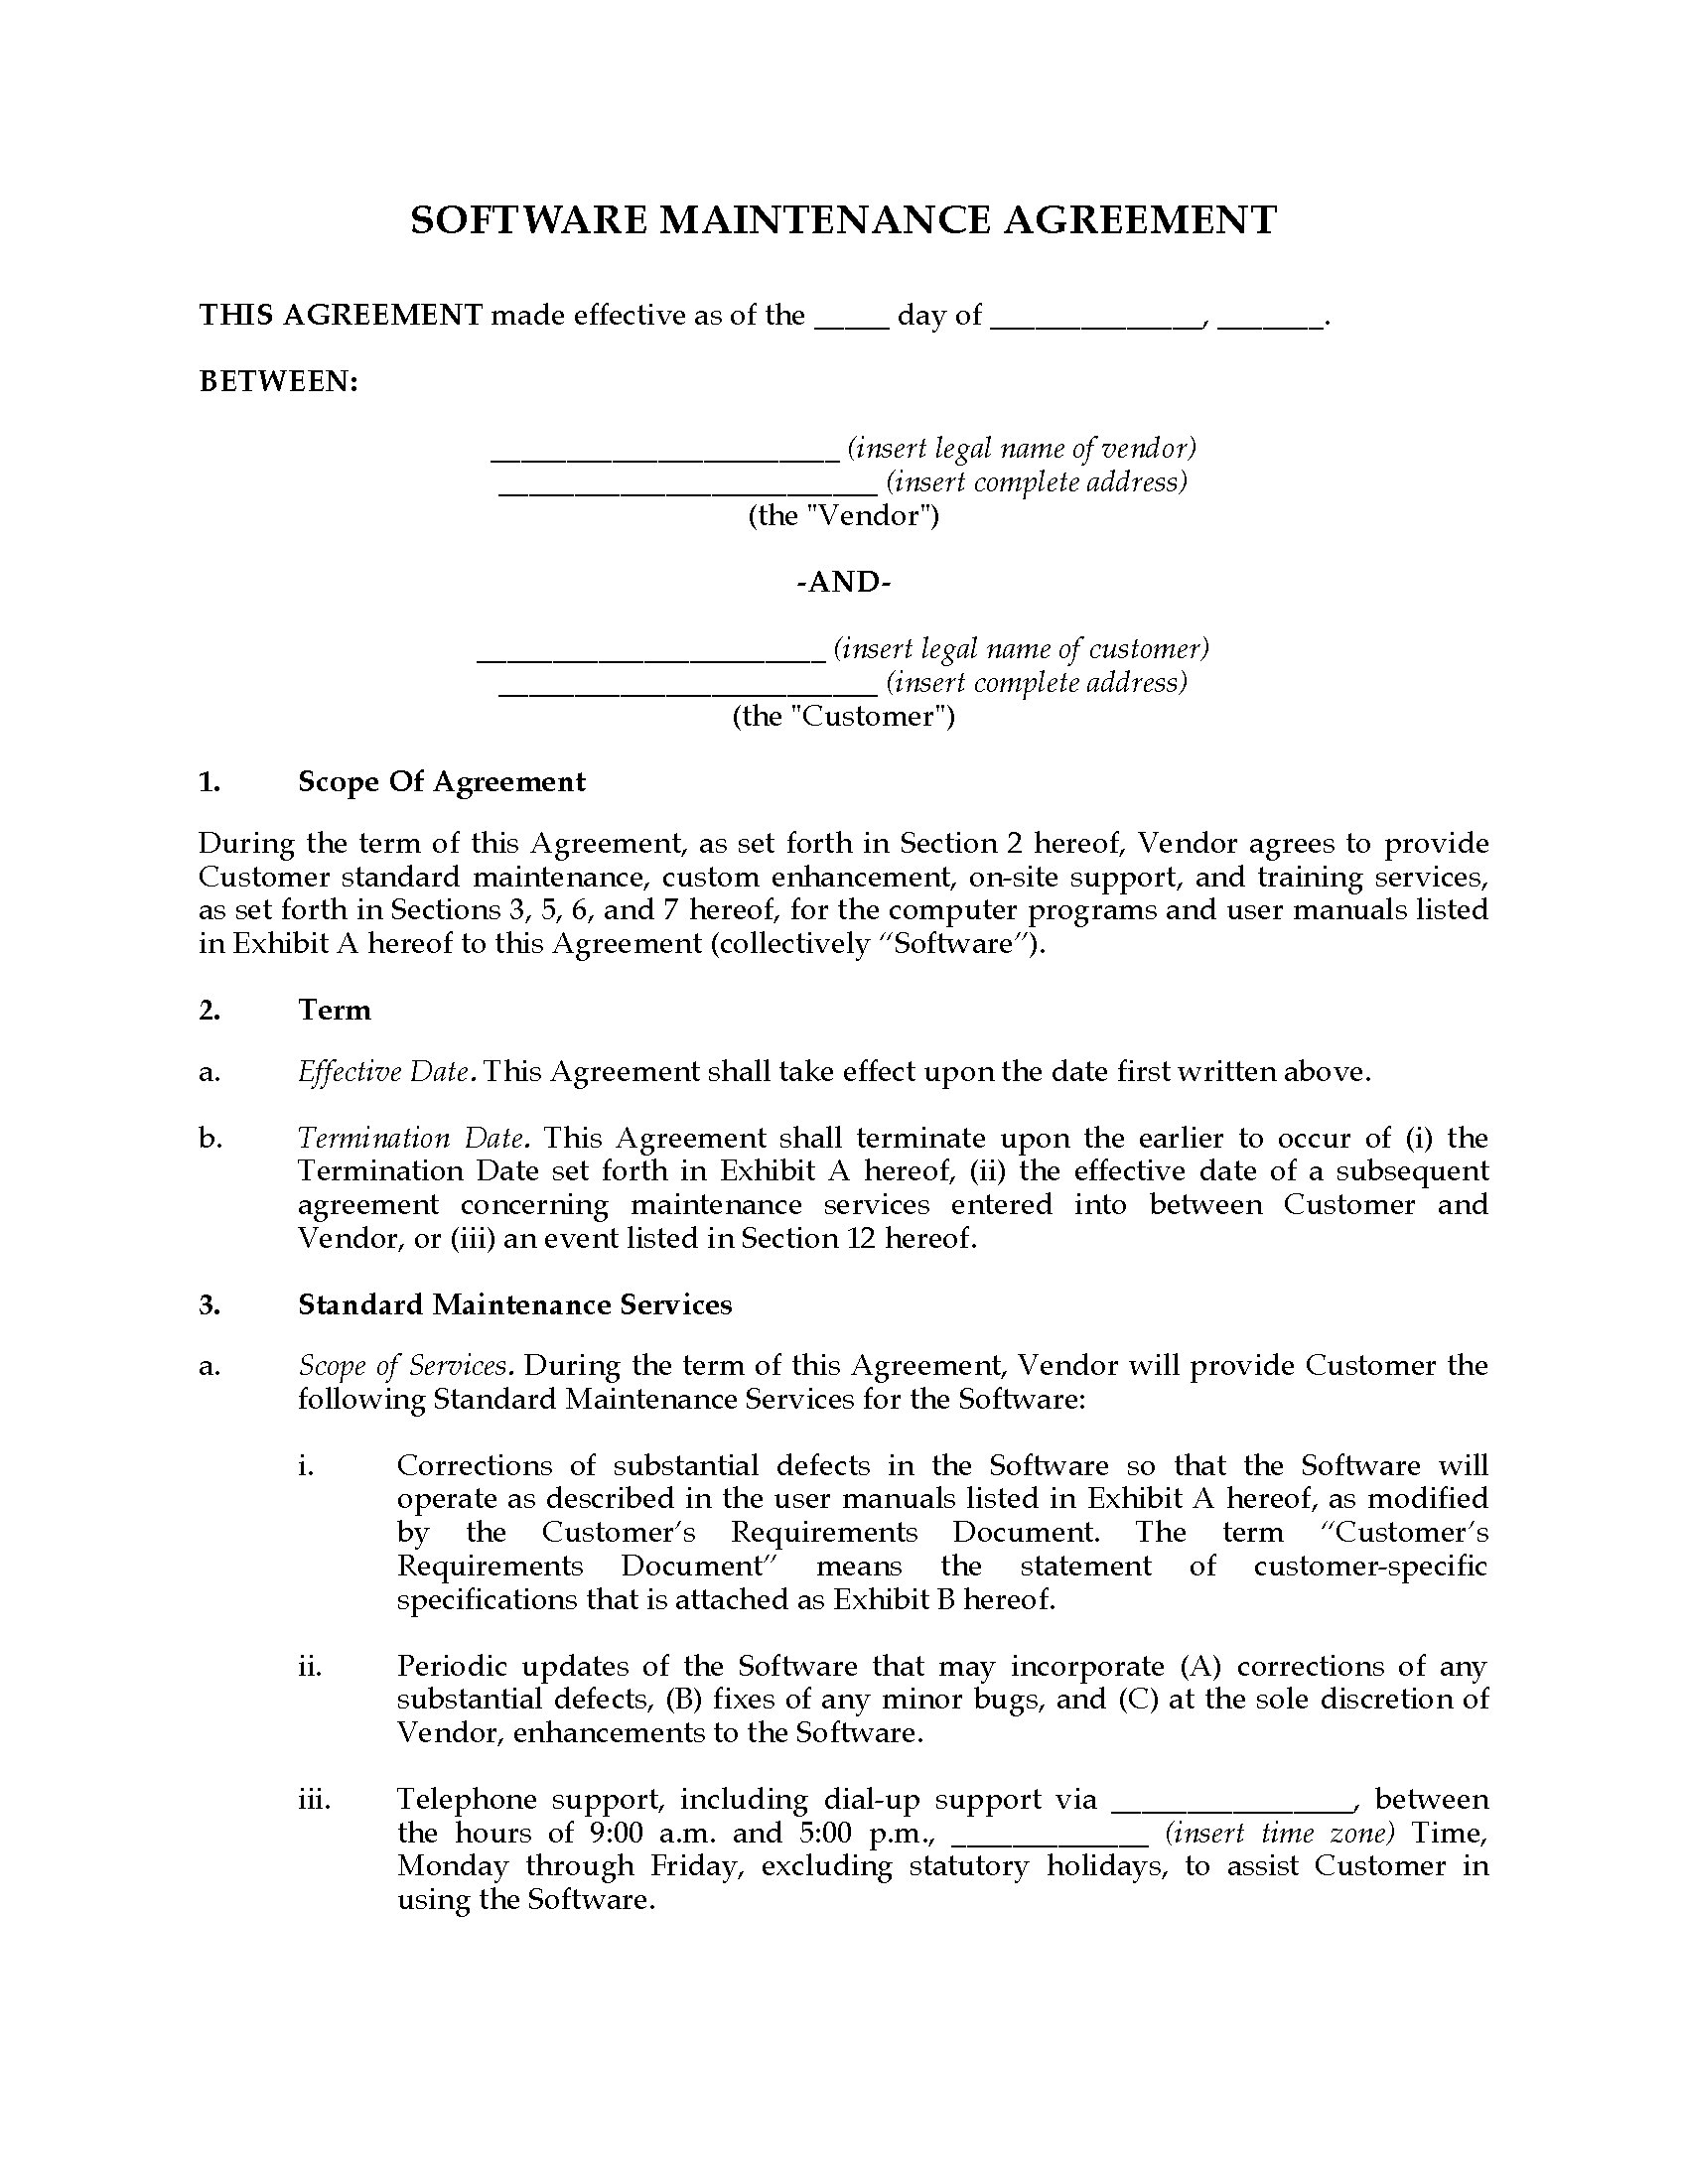 Canada Software Maintenance Agreement  Legal Forms and Business Templates  MegaDox.com